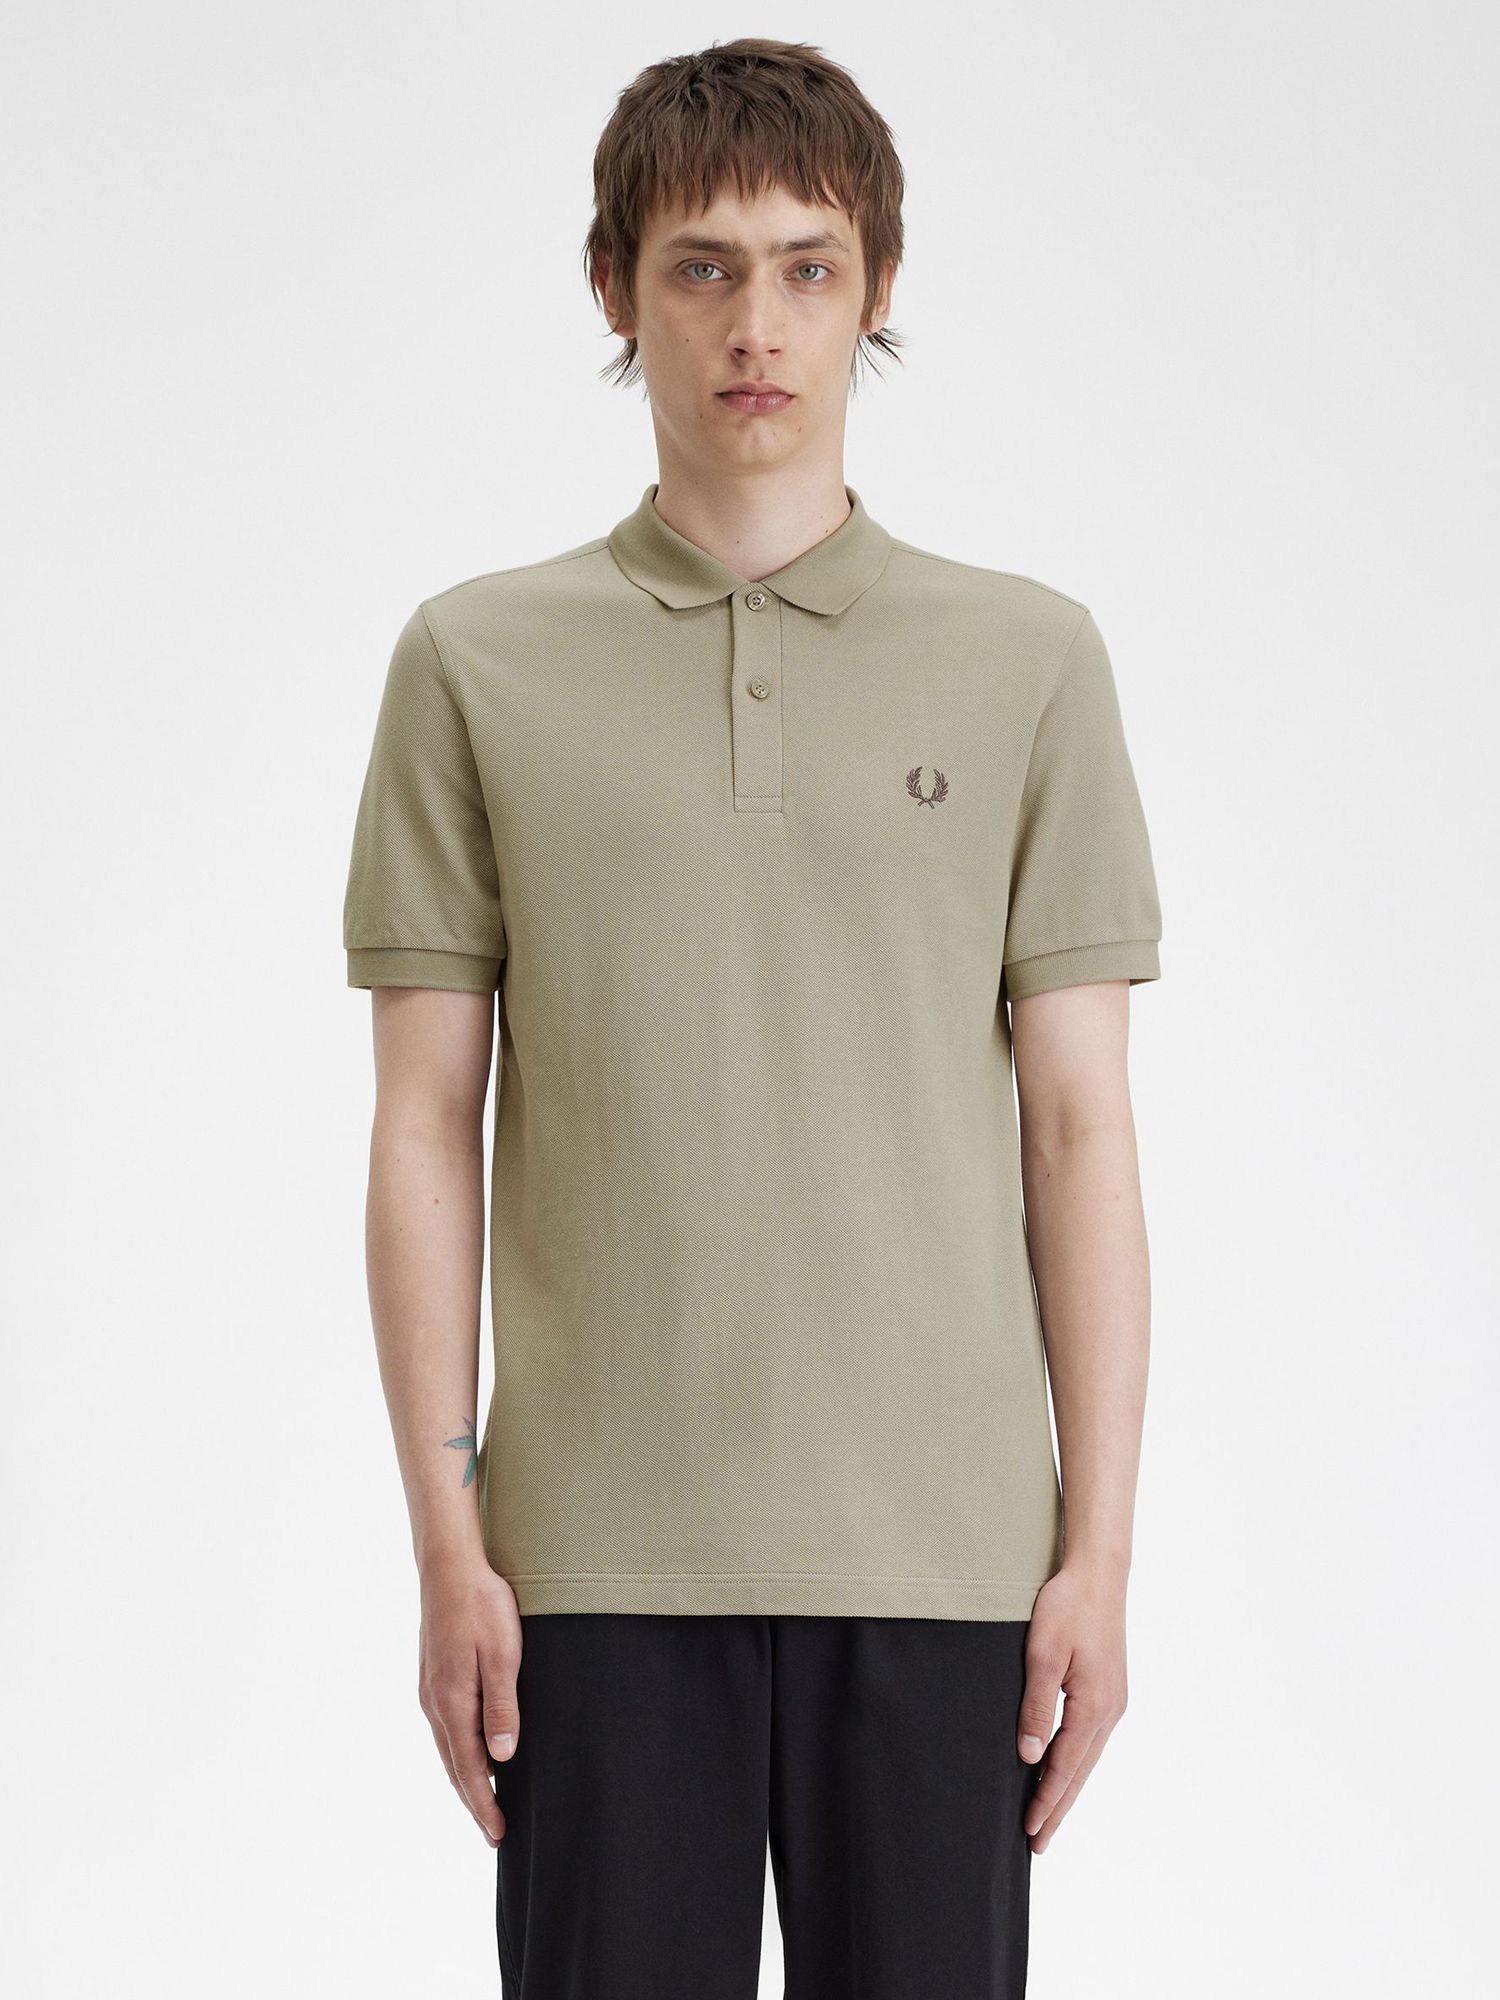 Buy Fred Perry Tennis Polo Shirt Online at johnlewis.com